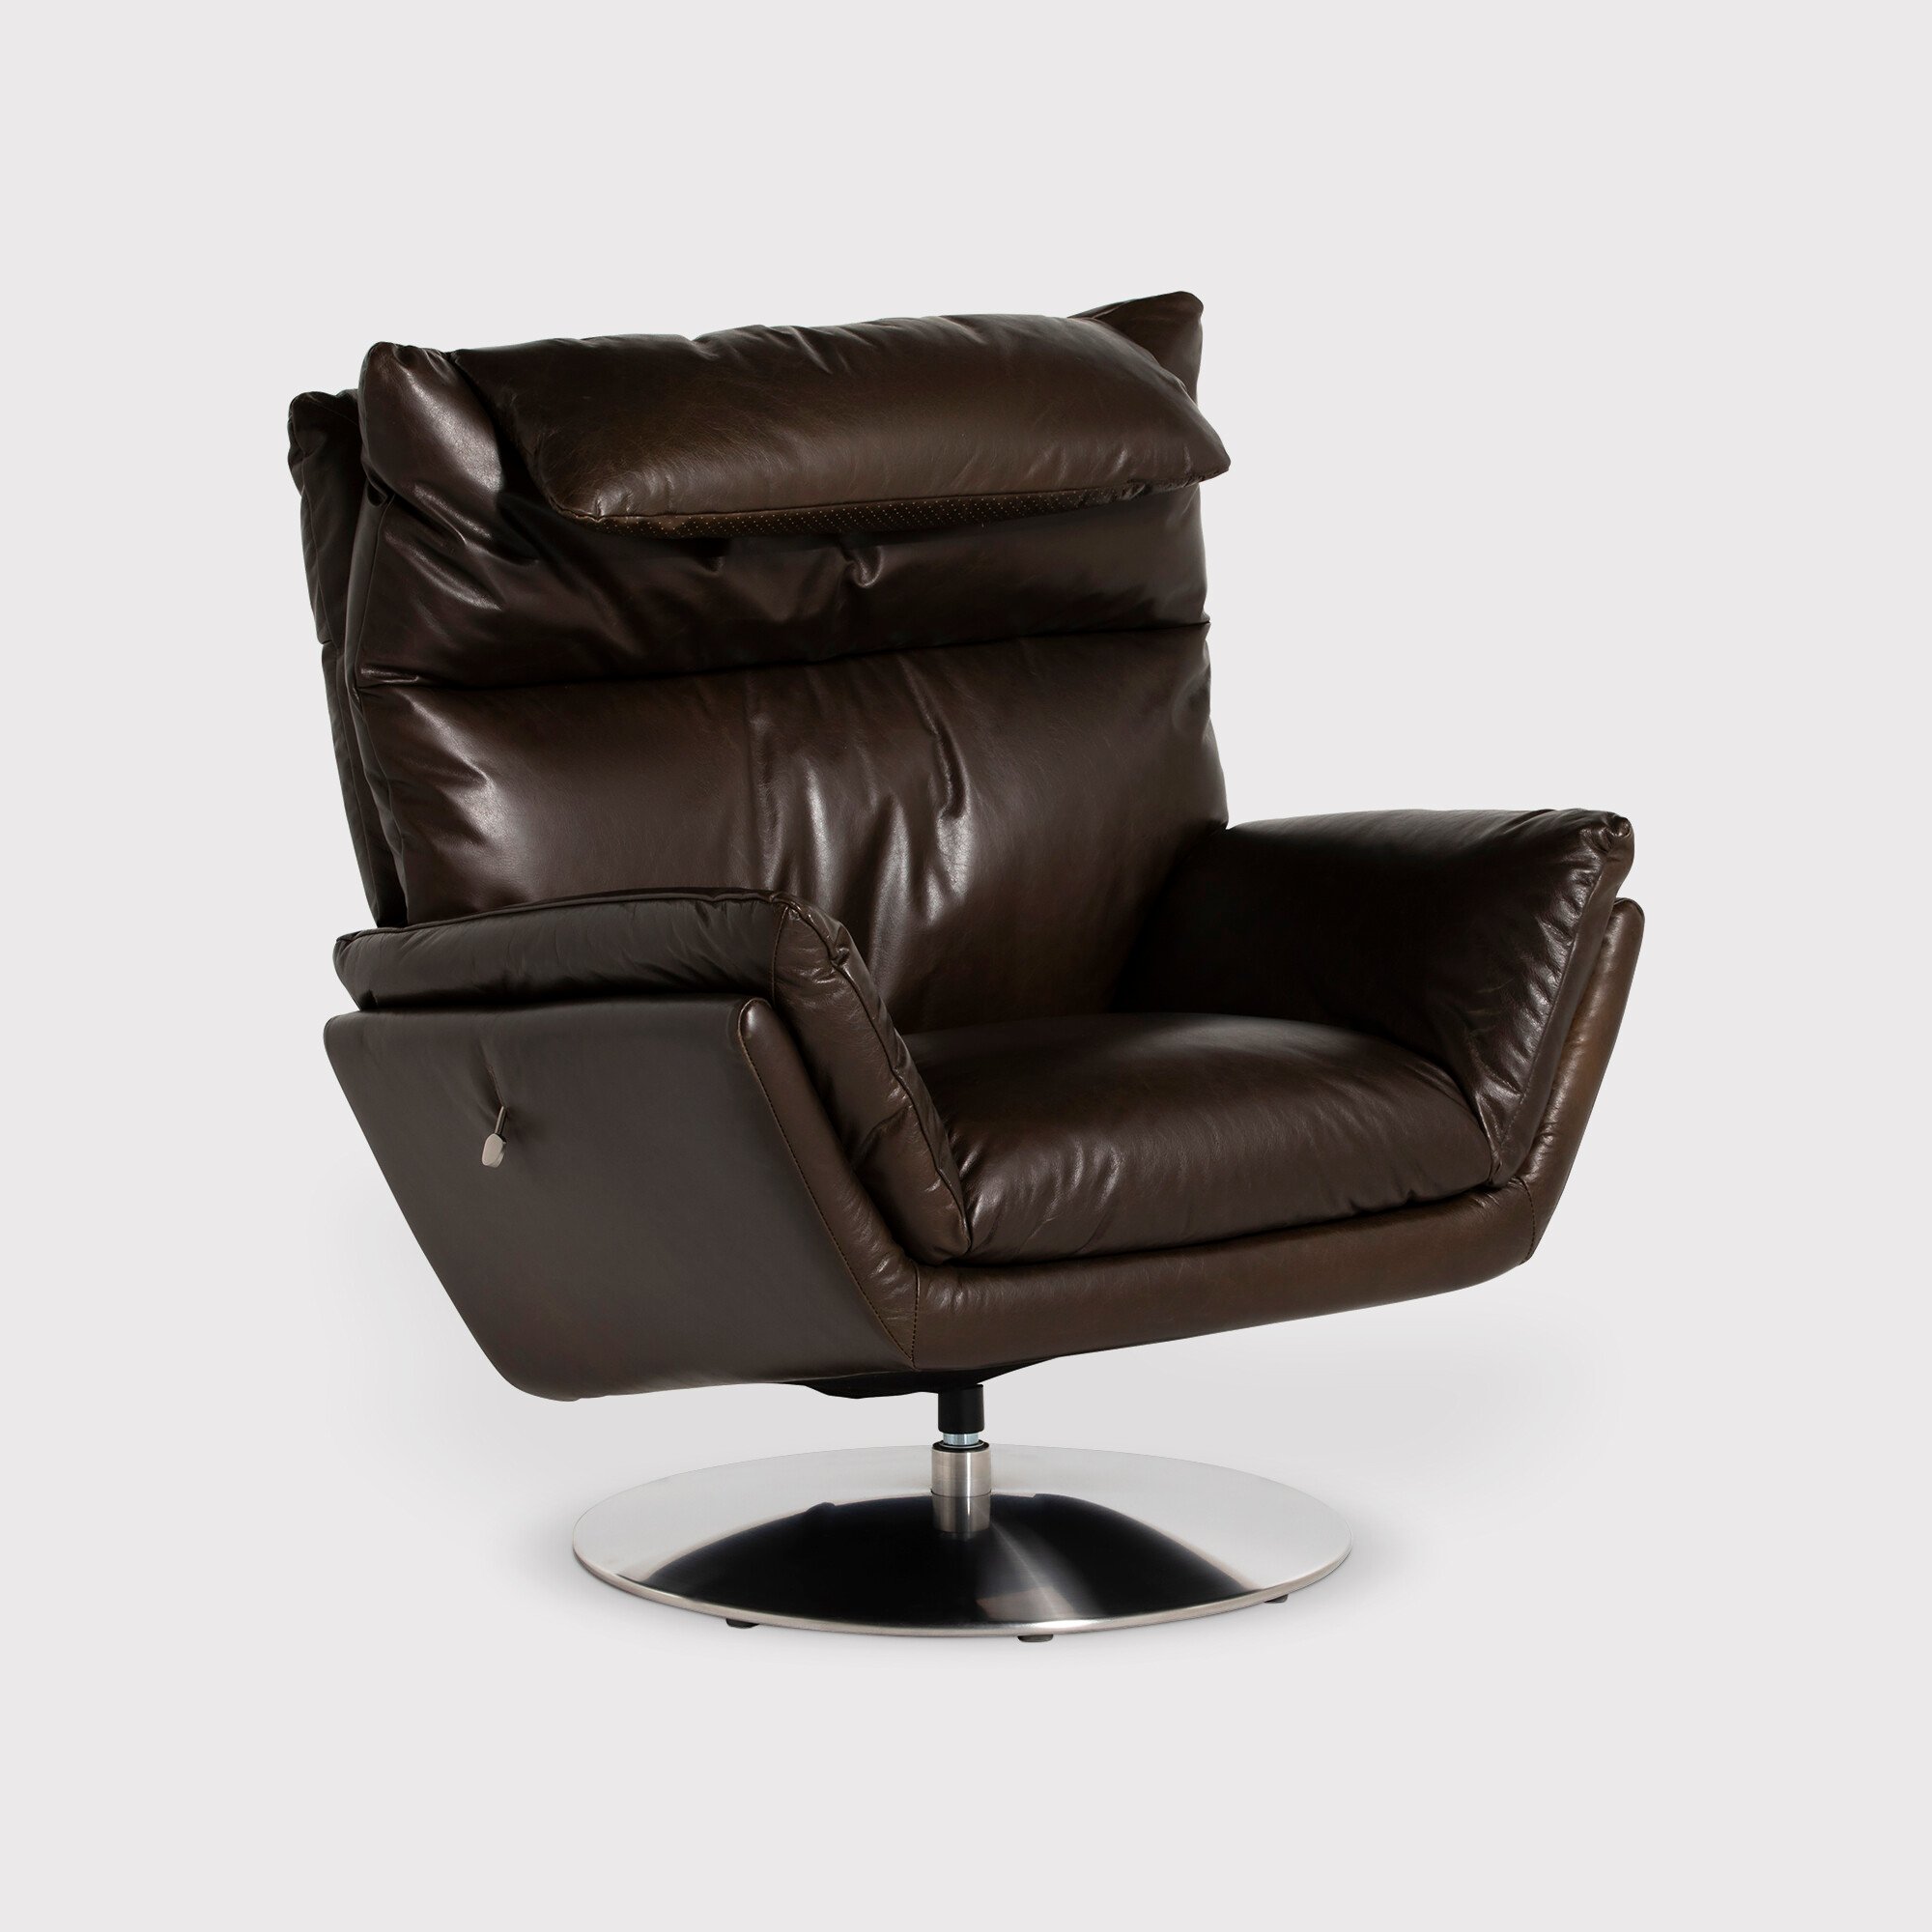 Jessup Swivel Armchair, Brown Leather | Barker & Stonehouse